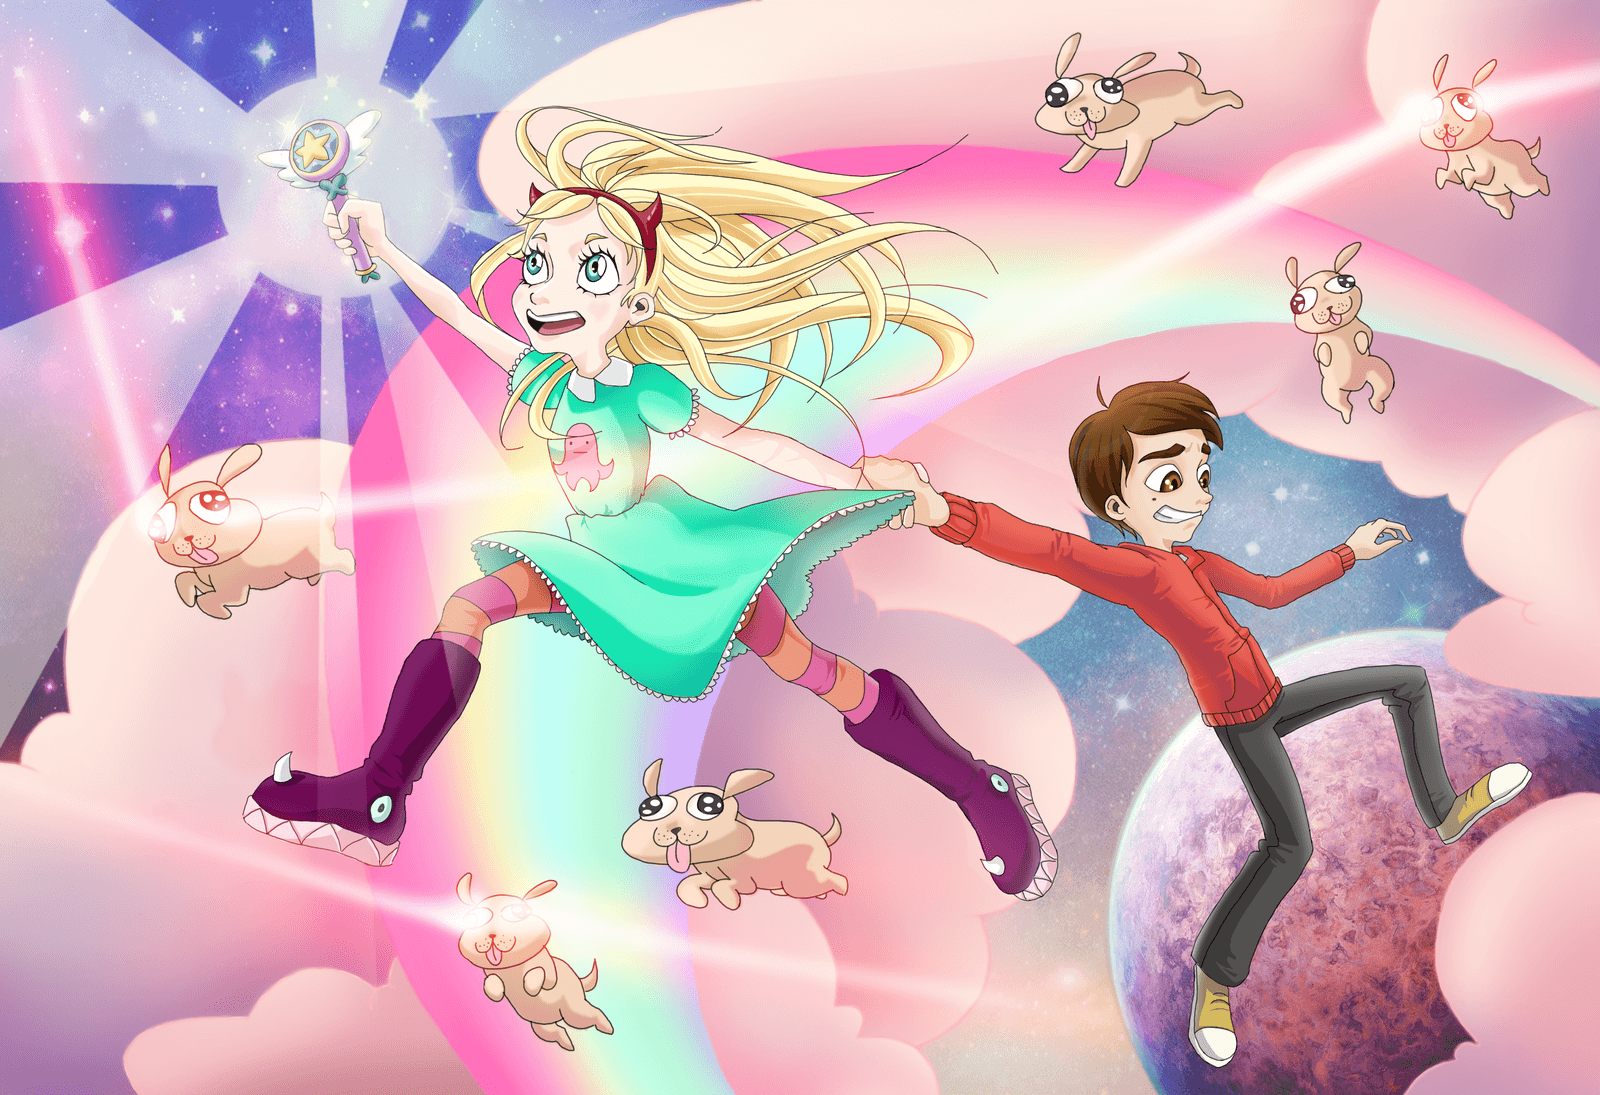 Star vs the forces of evil by lostatsea101